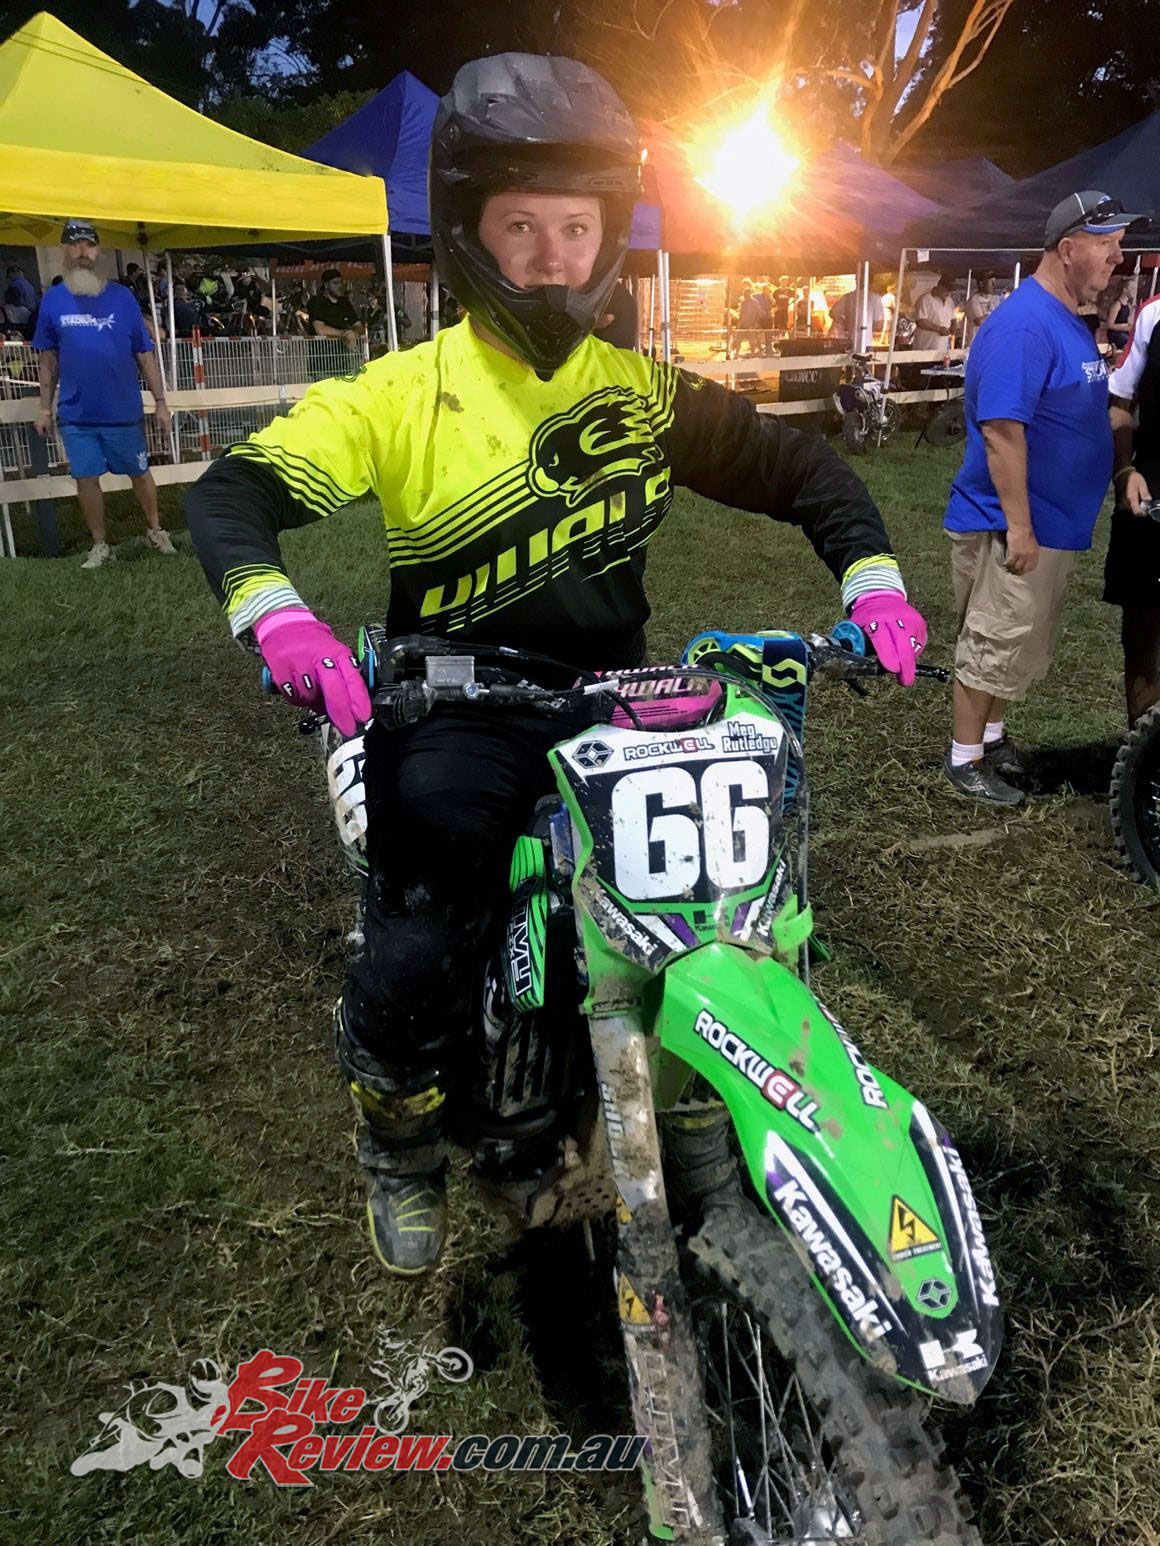 Meghan Rutledge at the 2018 Coffs Harbour Stadium Motocross event with her Kawasaki KX250F